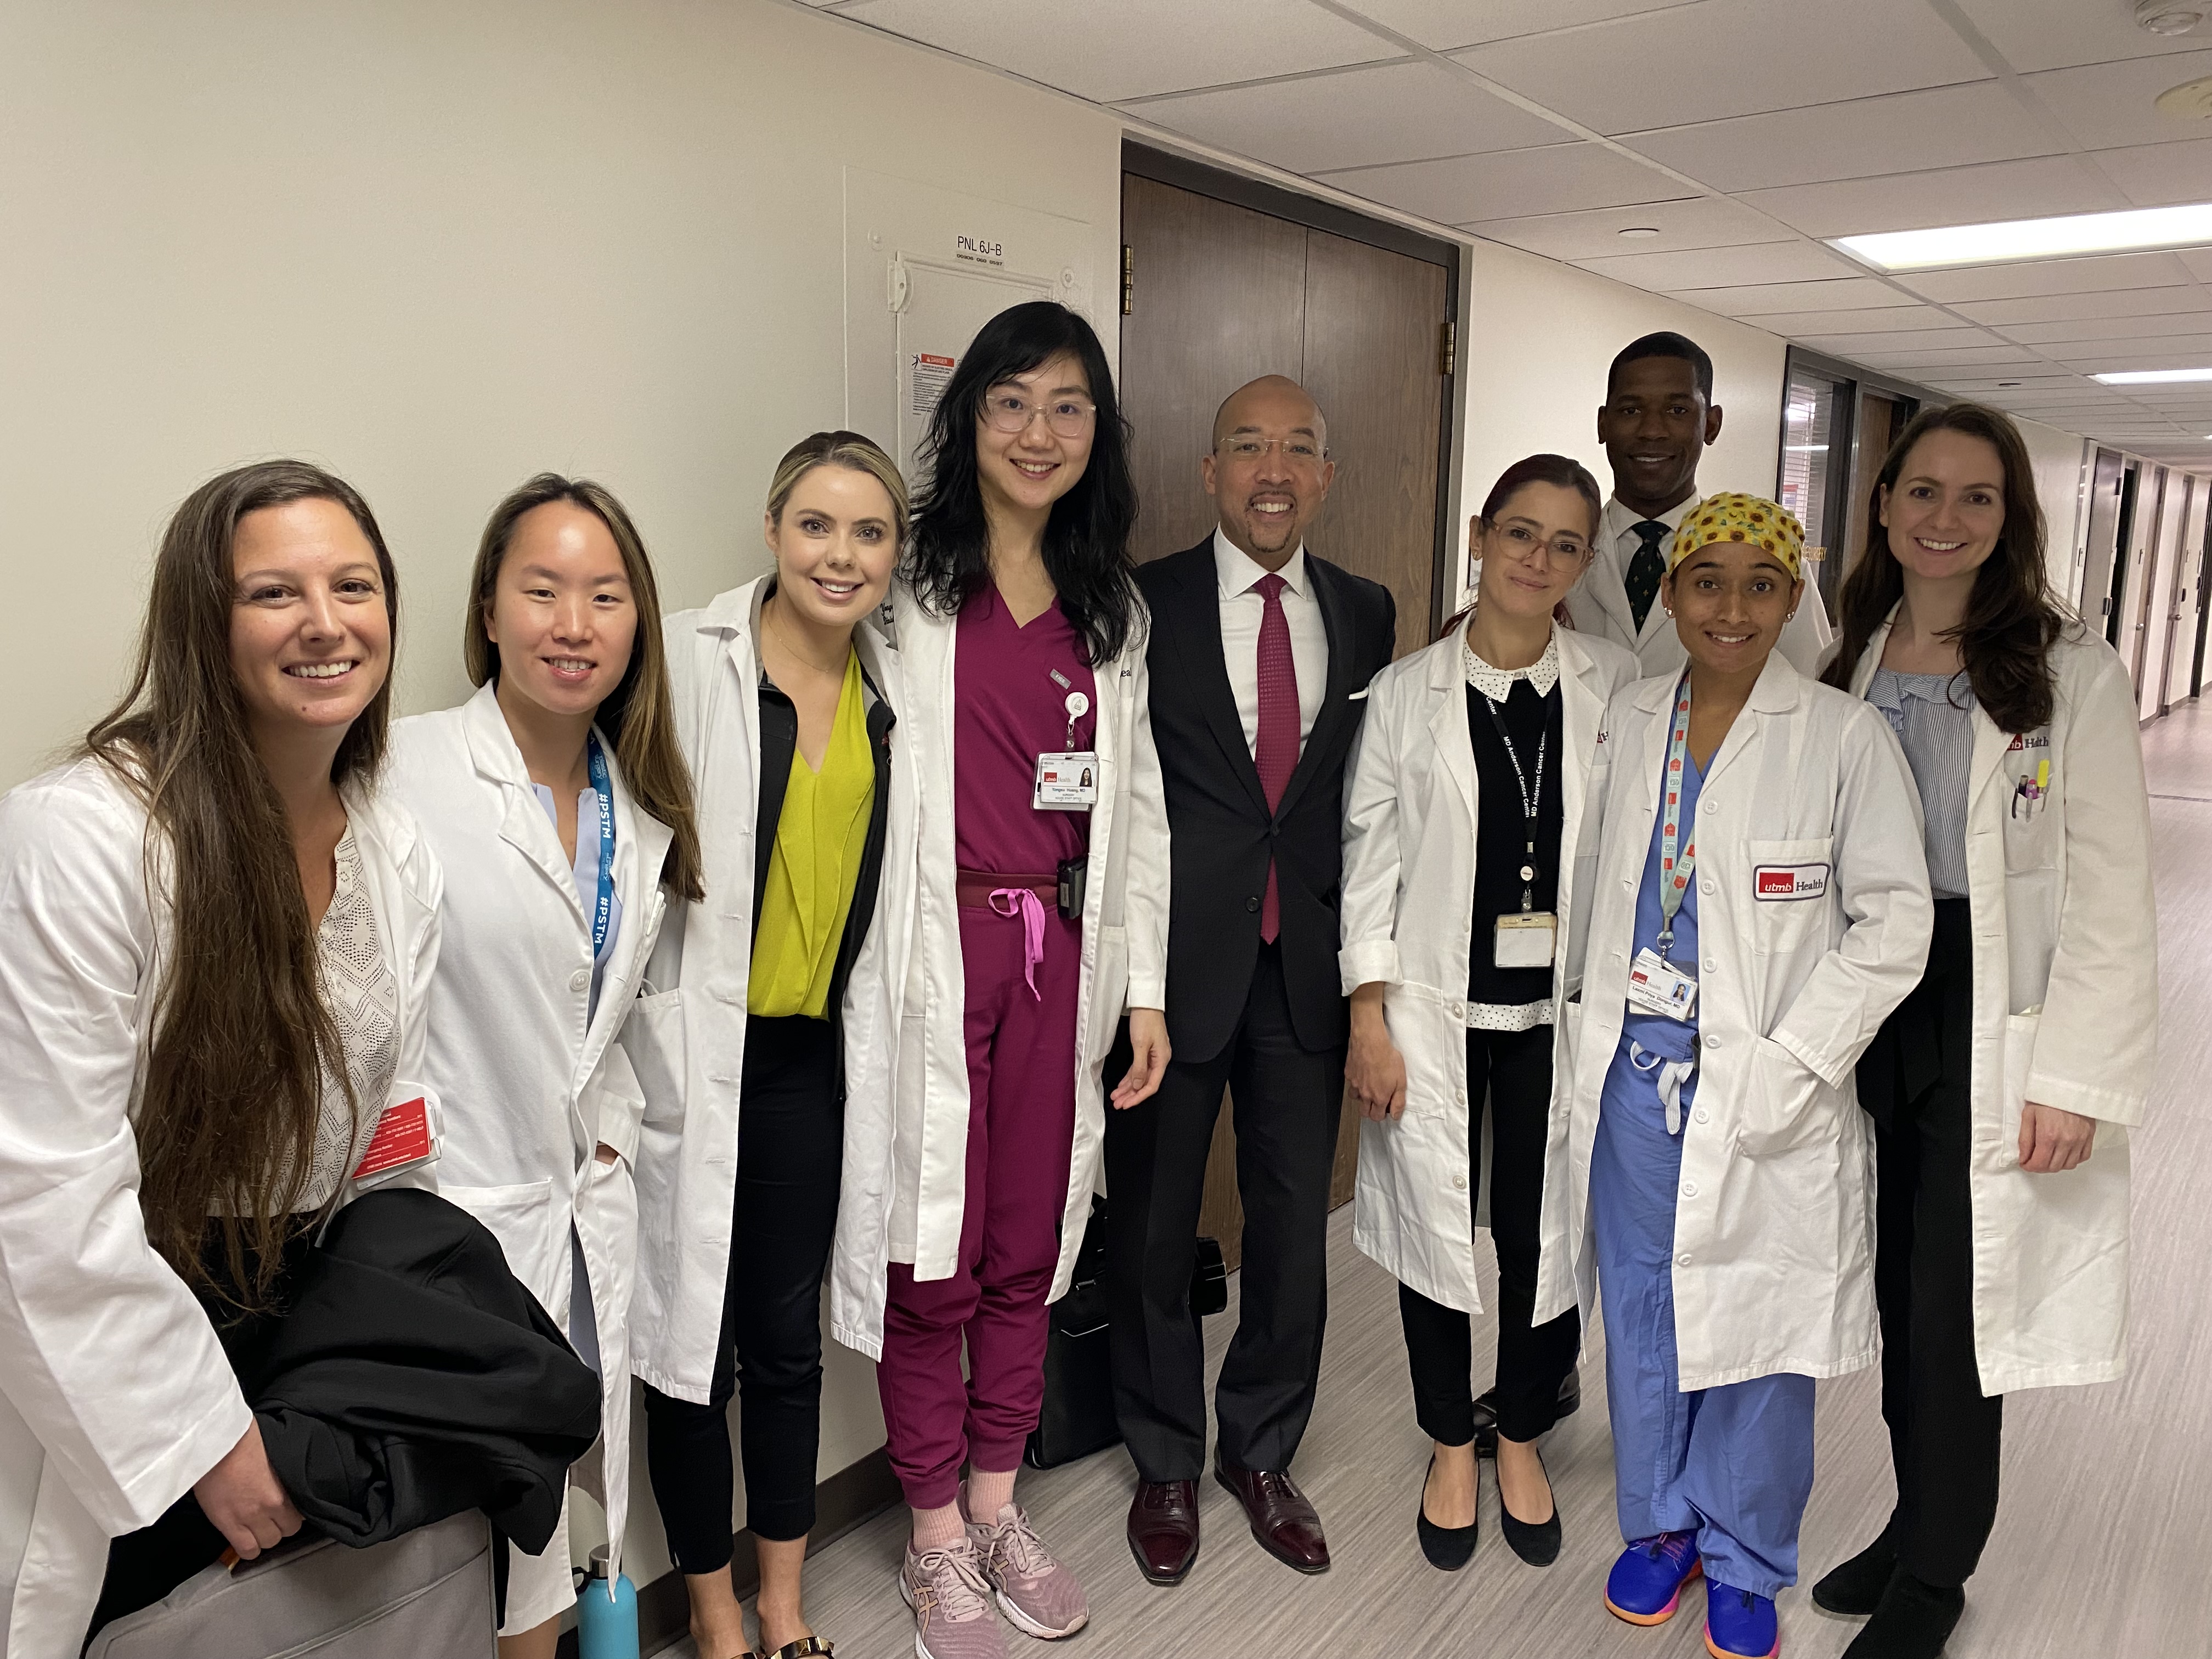 Dr. Butler visits the UTMB Department of Surgery